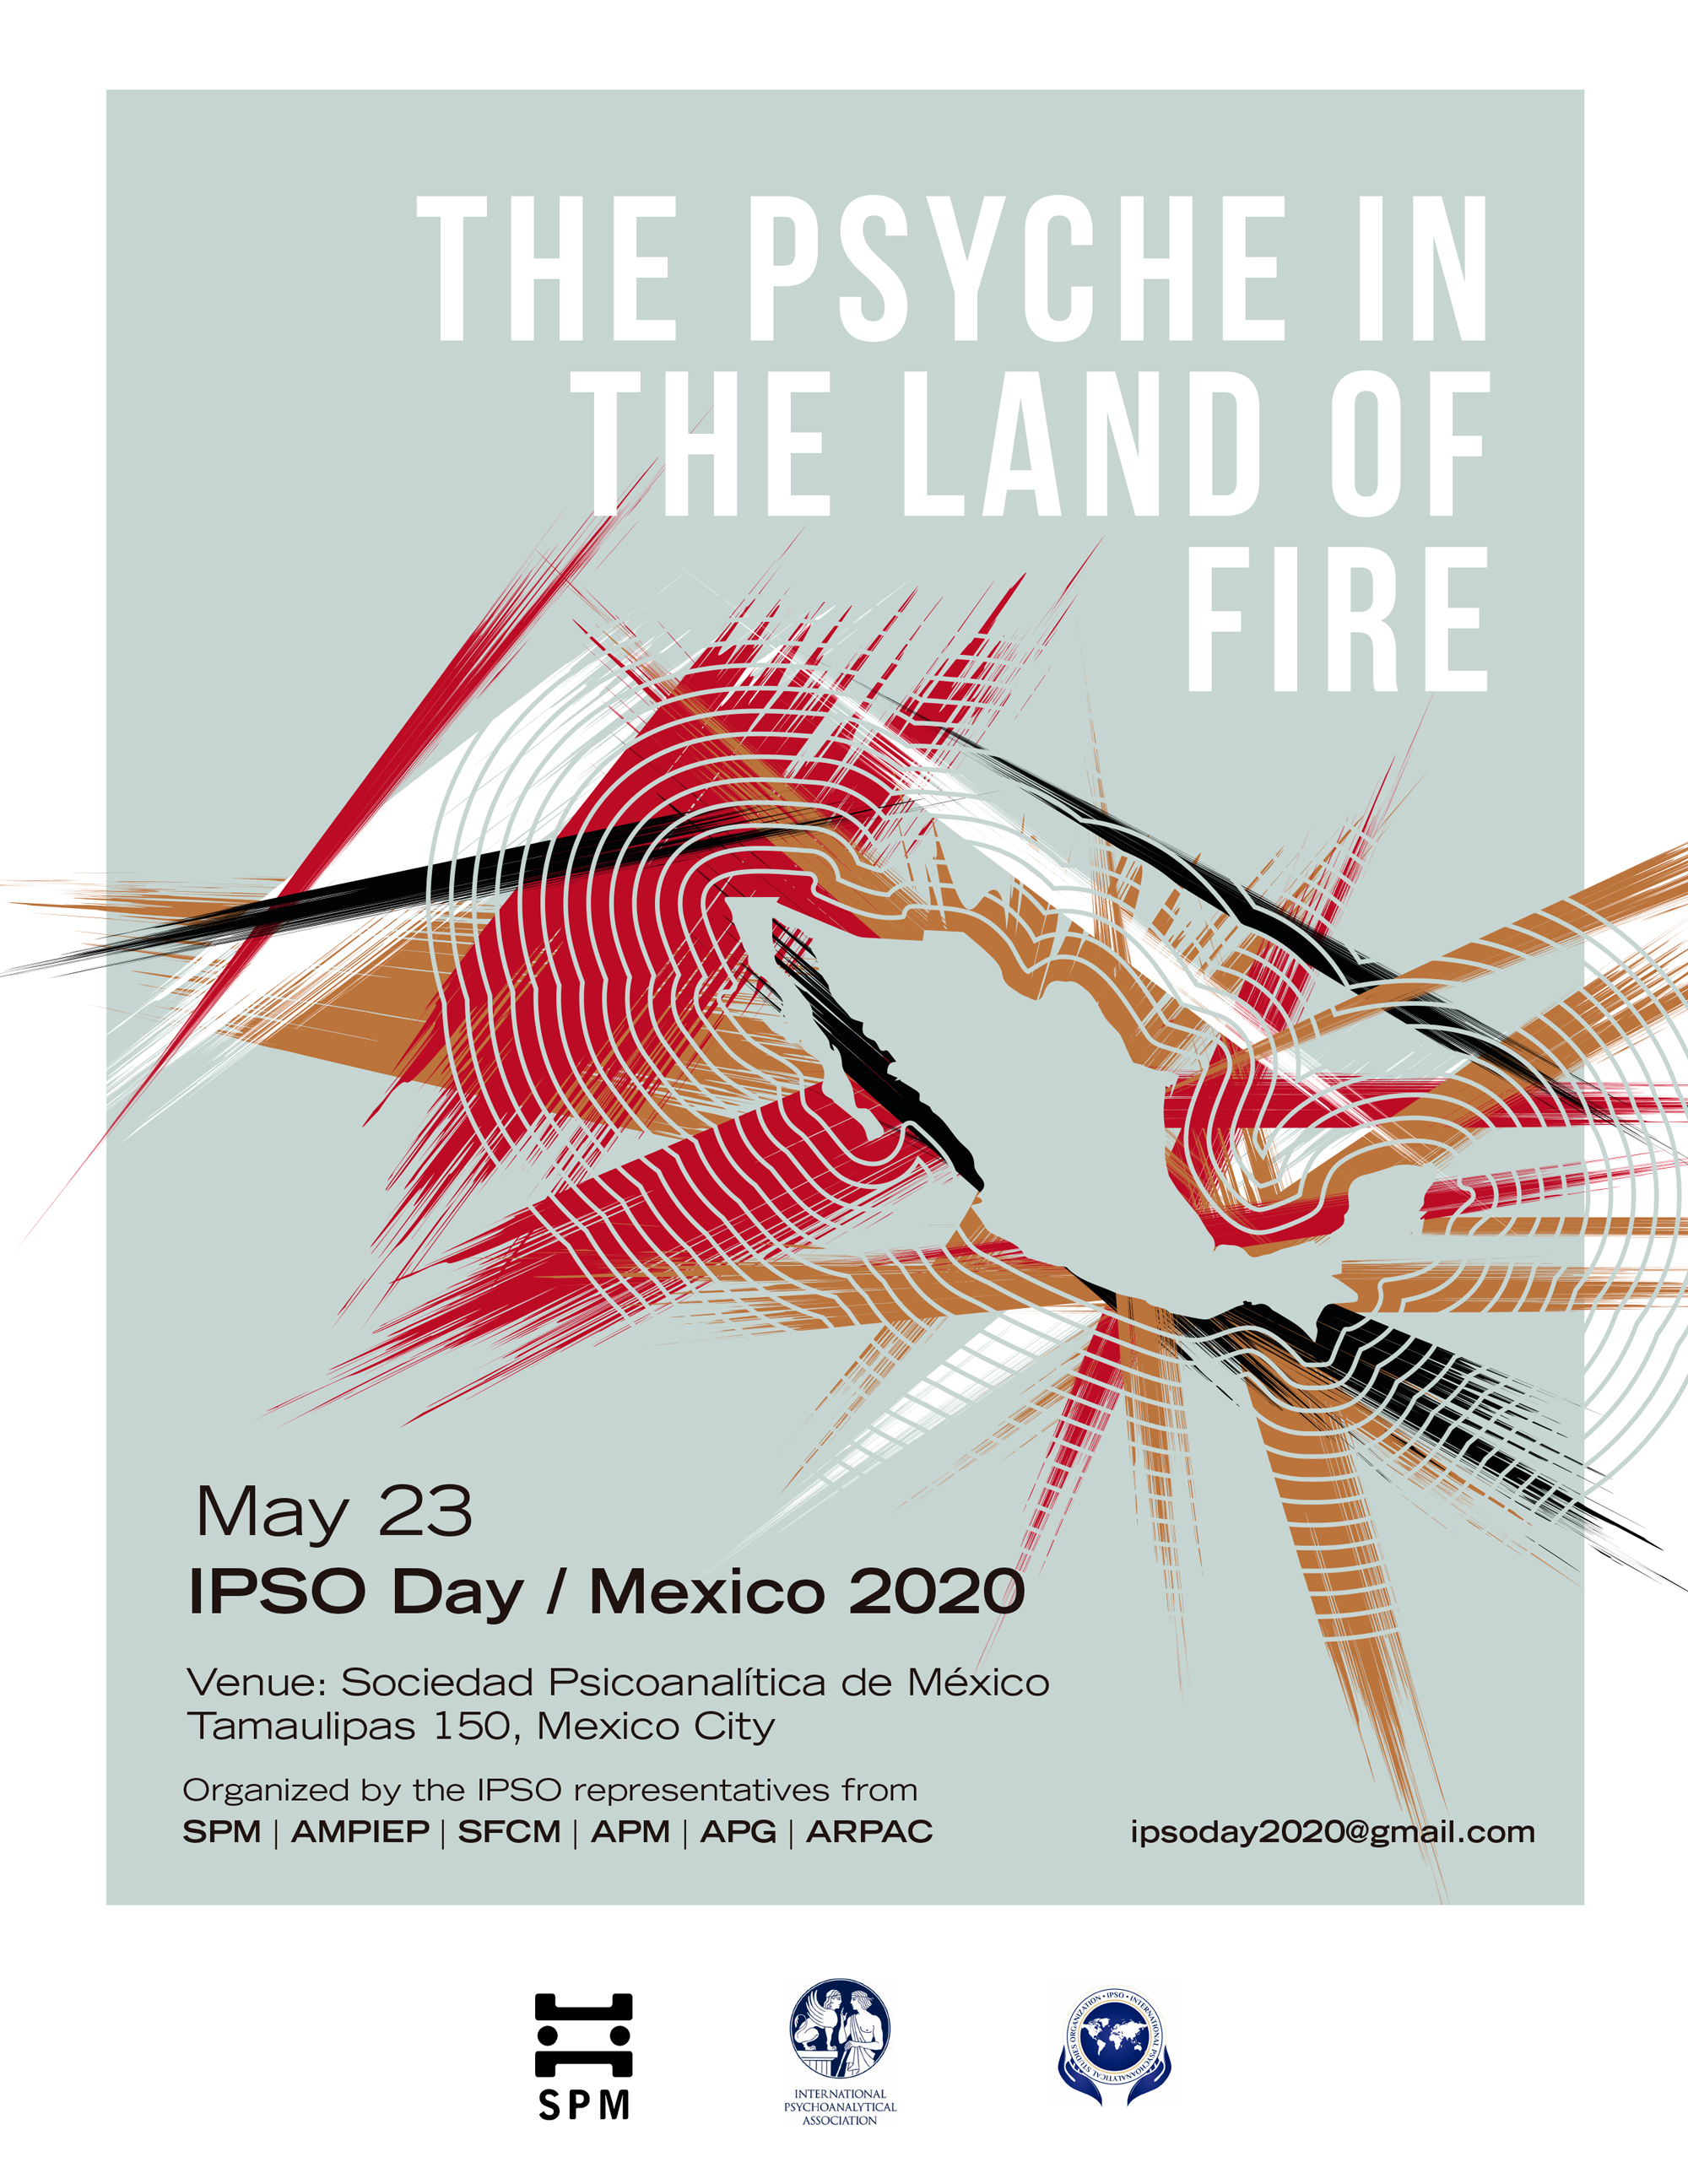 IPSO DAY: The Psyche in the Land of Fire